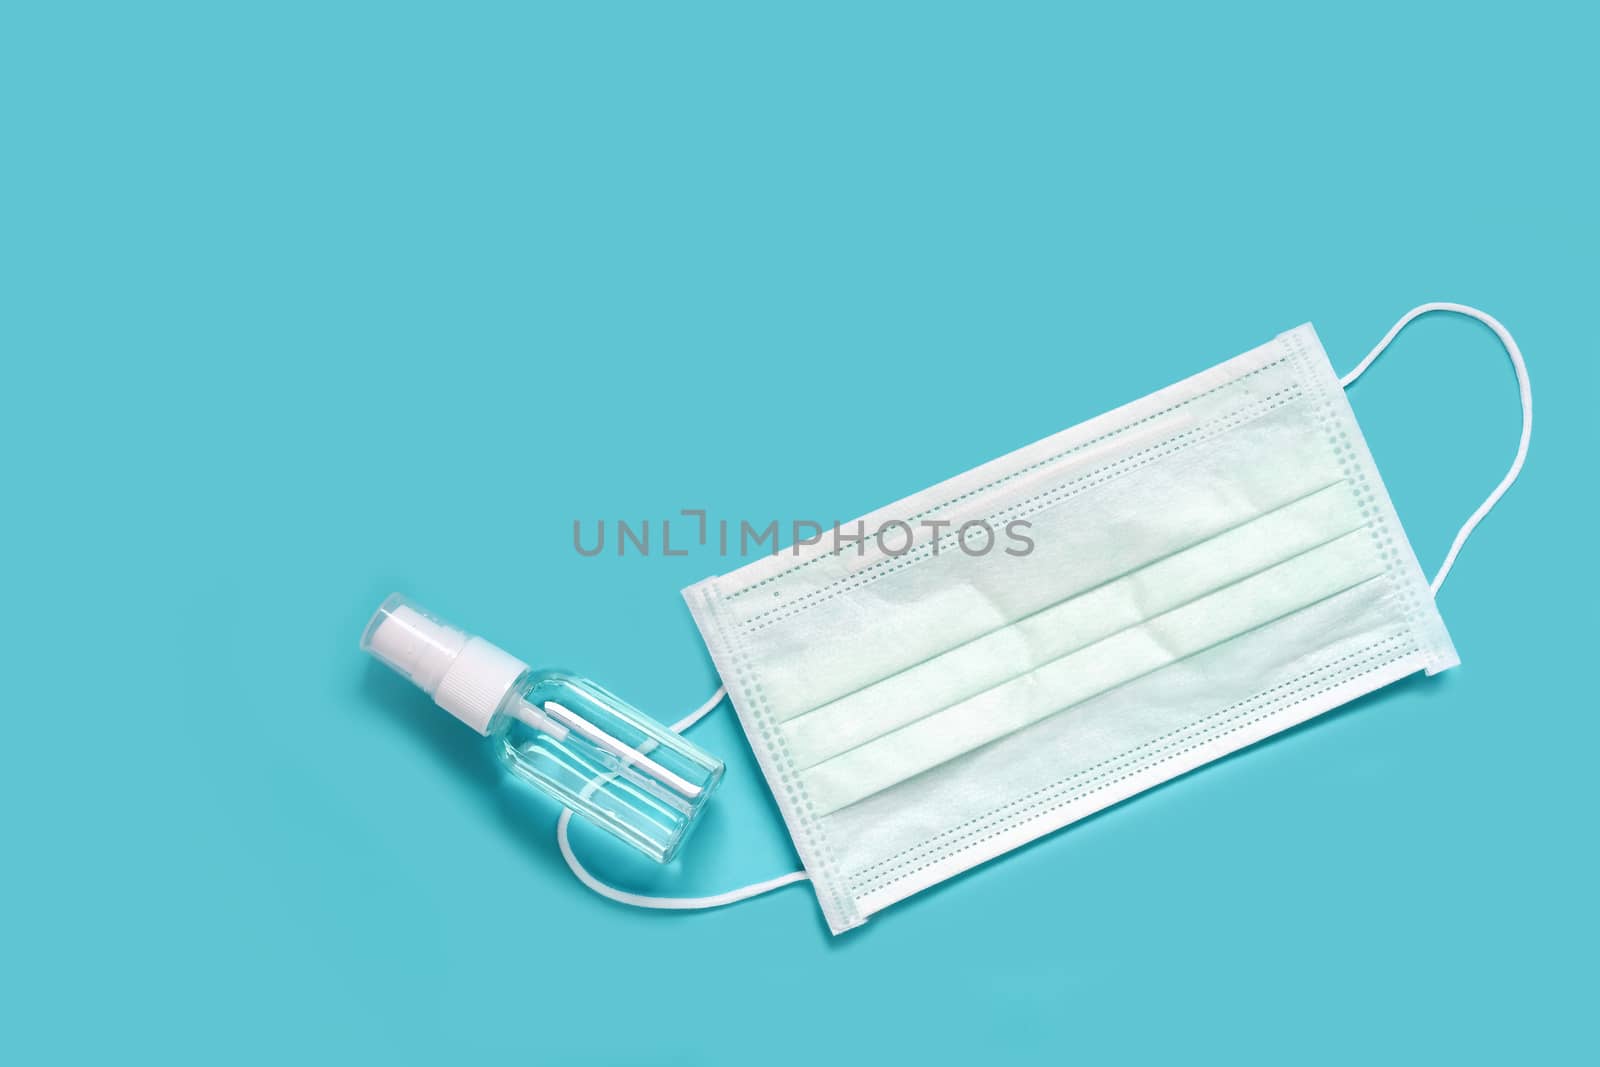 medical face mask and disinfectant alcohol sanitizer spray to prevent coronavirus disease. products to protect from germs when on the go. blue background for text.